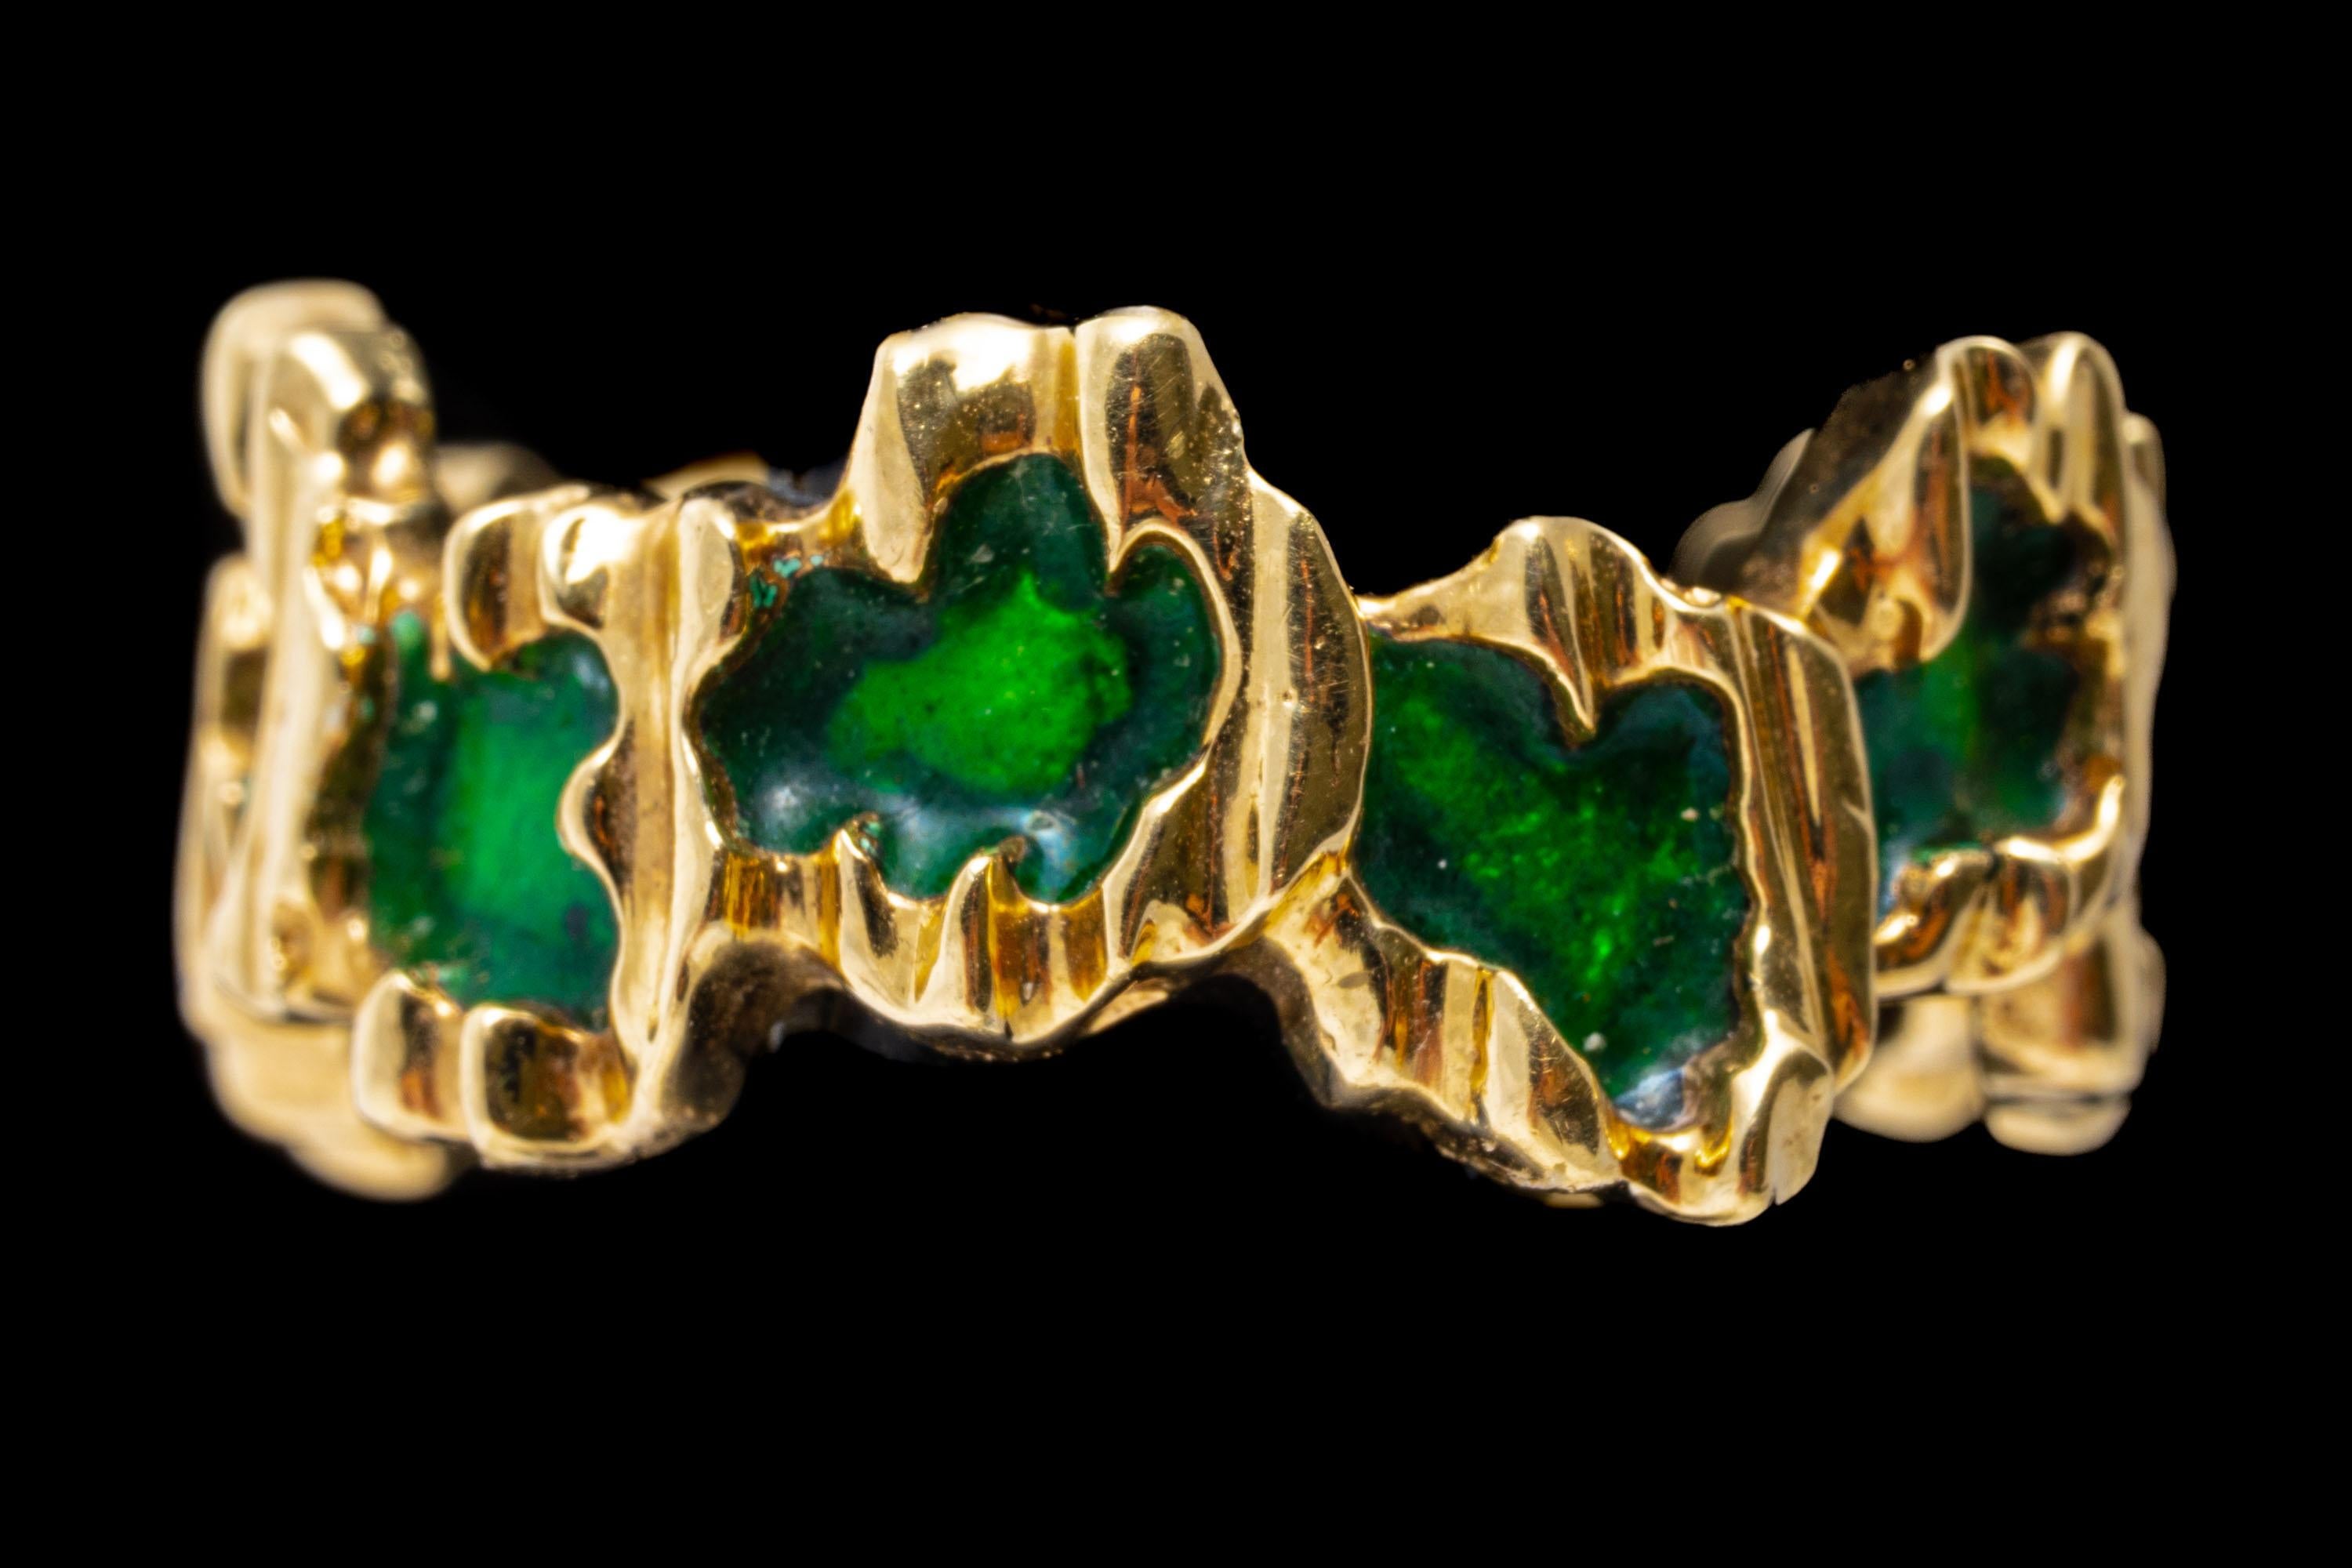 14k yellow gold ring. This unique, striking wide band ring is decorated throughout with a staggered pattern of  bright green color enamel, trimmed in yellow gold.
Marks: None, tests 14k
Dimensions: 1/4